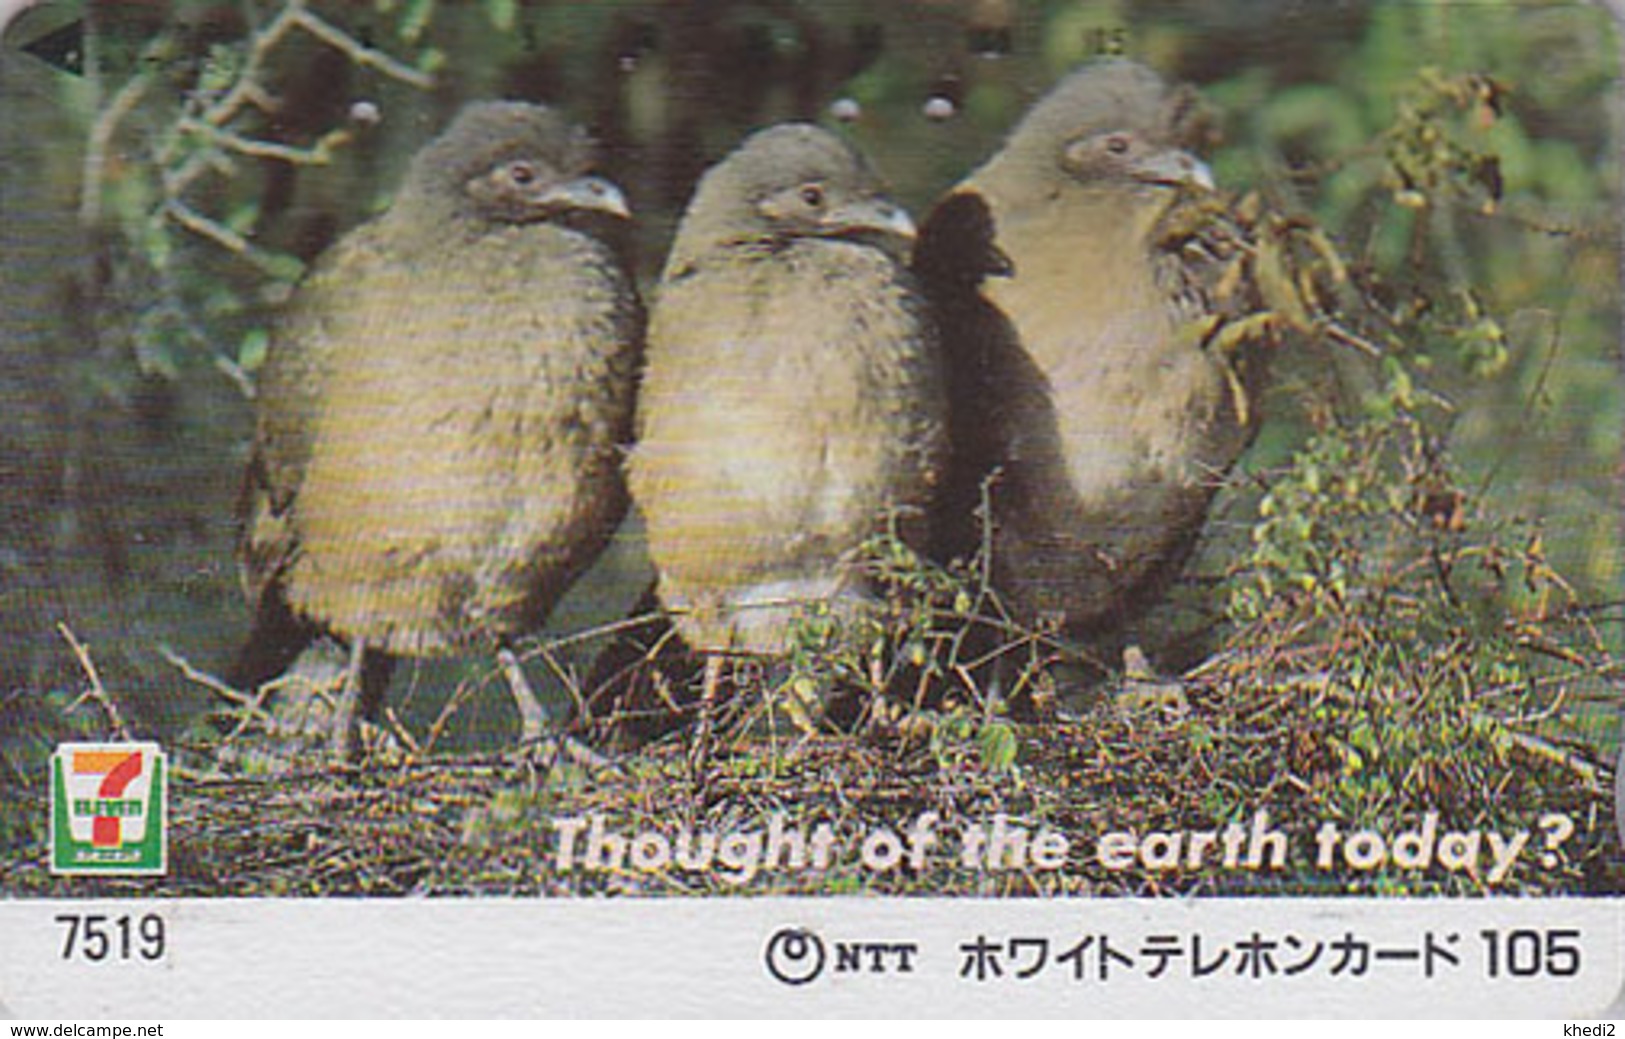 Télécarte JAPON / SERIE 7/11 - 7519 TBE - THOUGHT OF THE EARTH TODAY - ANIMAL - OISEAU - BIRD JAPAN Phonecard - Vogel BE - Songbirds & Tree Dwellers